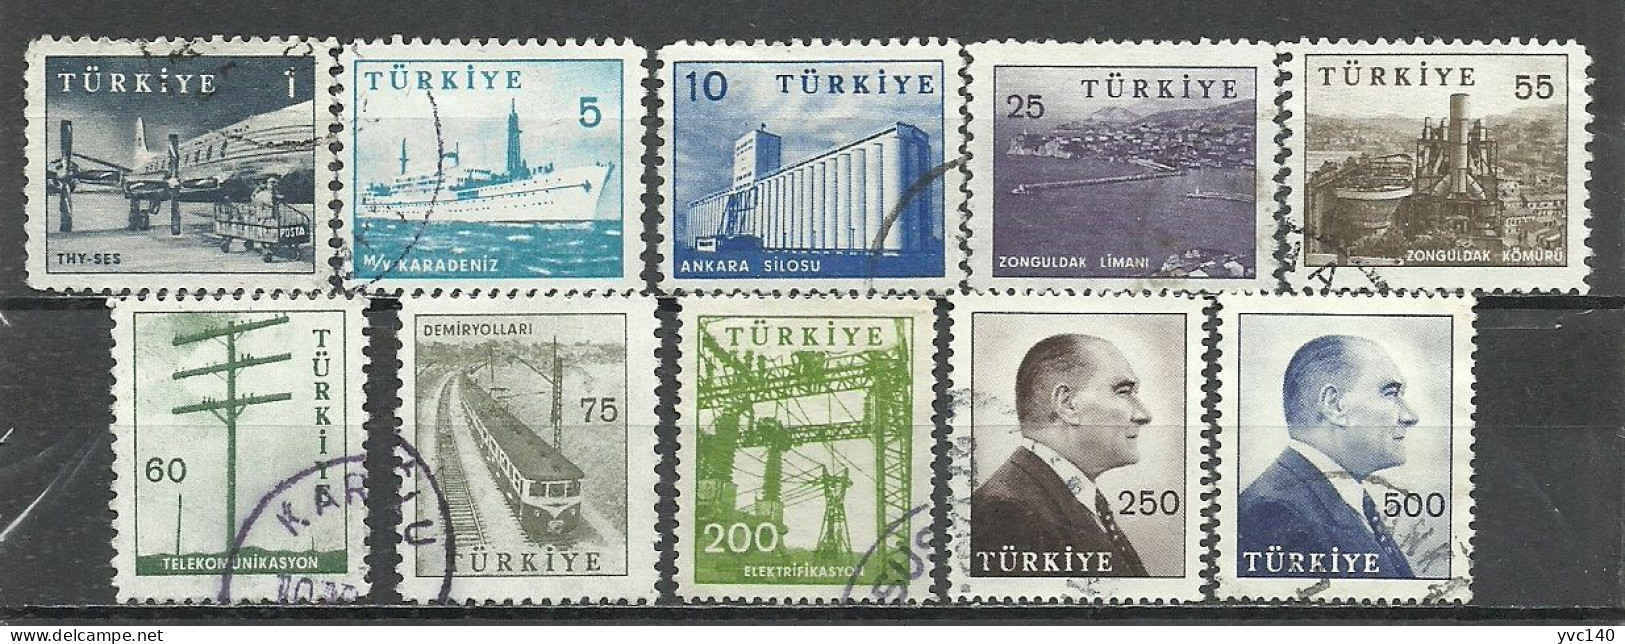 Turkey; 1959 Pictorial Postage Stamps (Complete Set) - Used Stamps